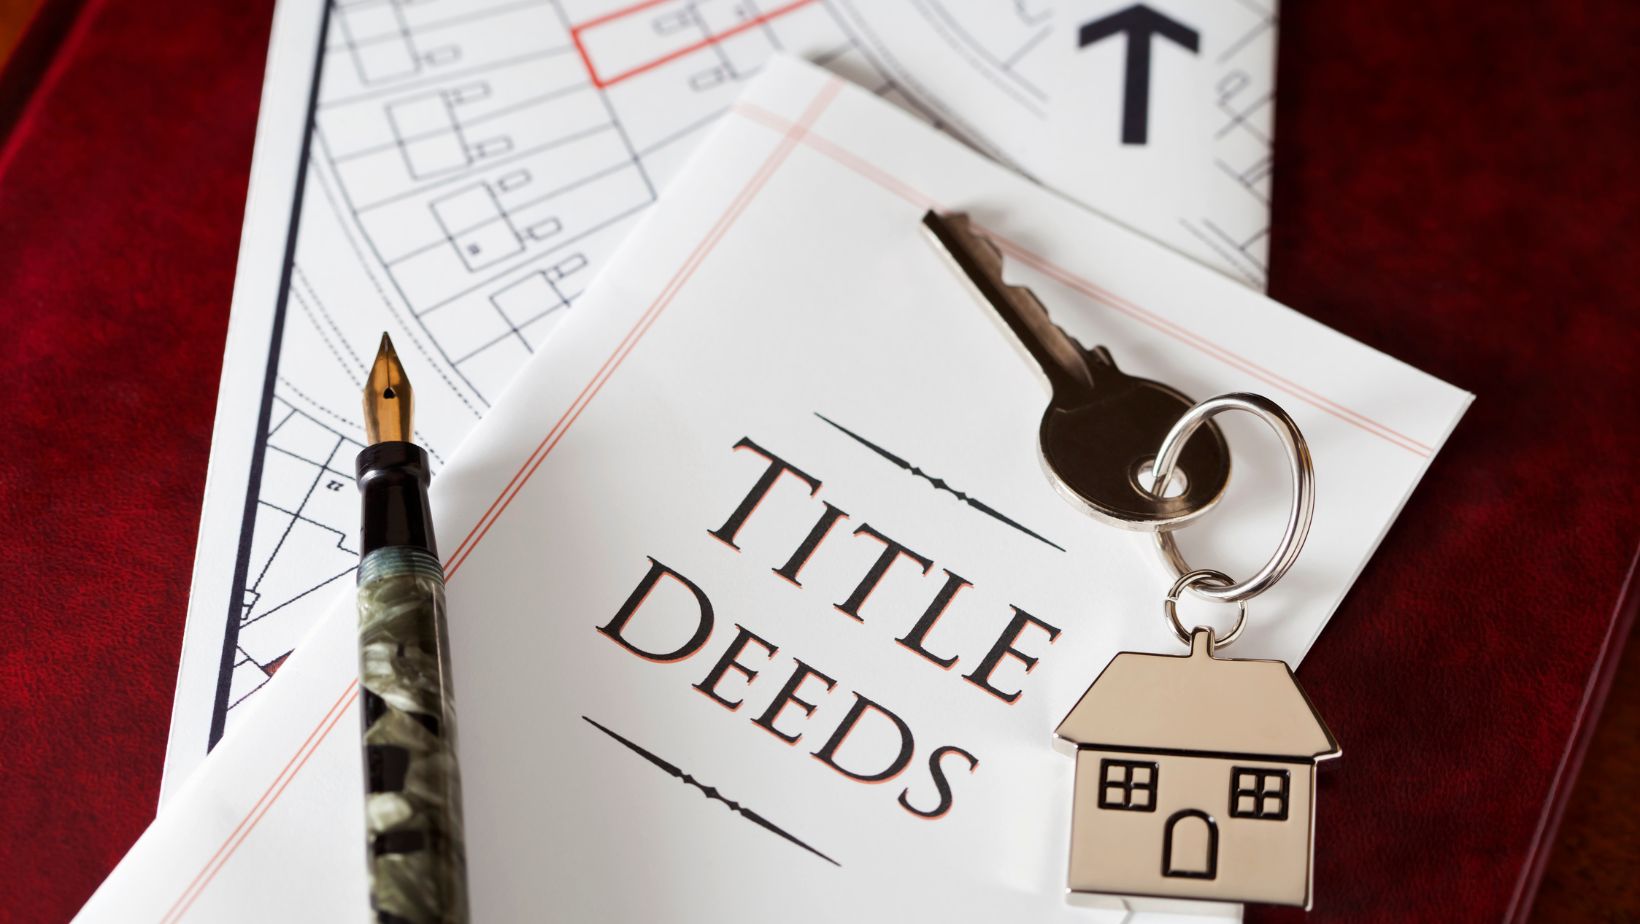 Title deed document and house key